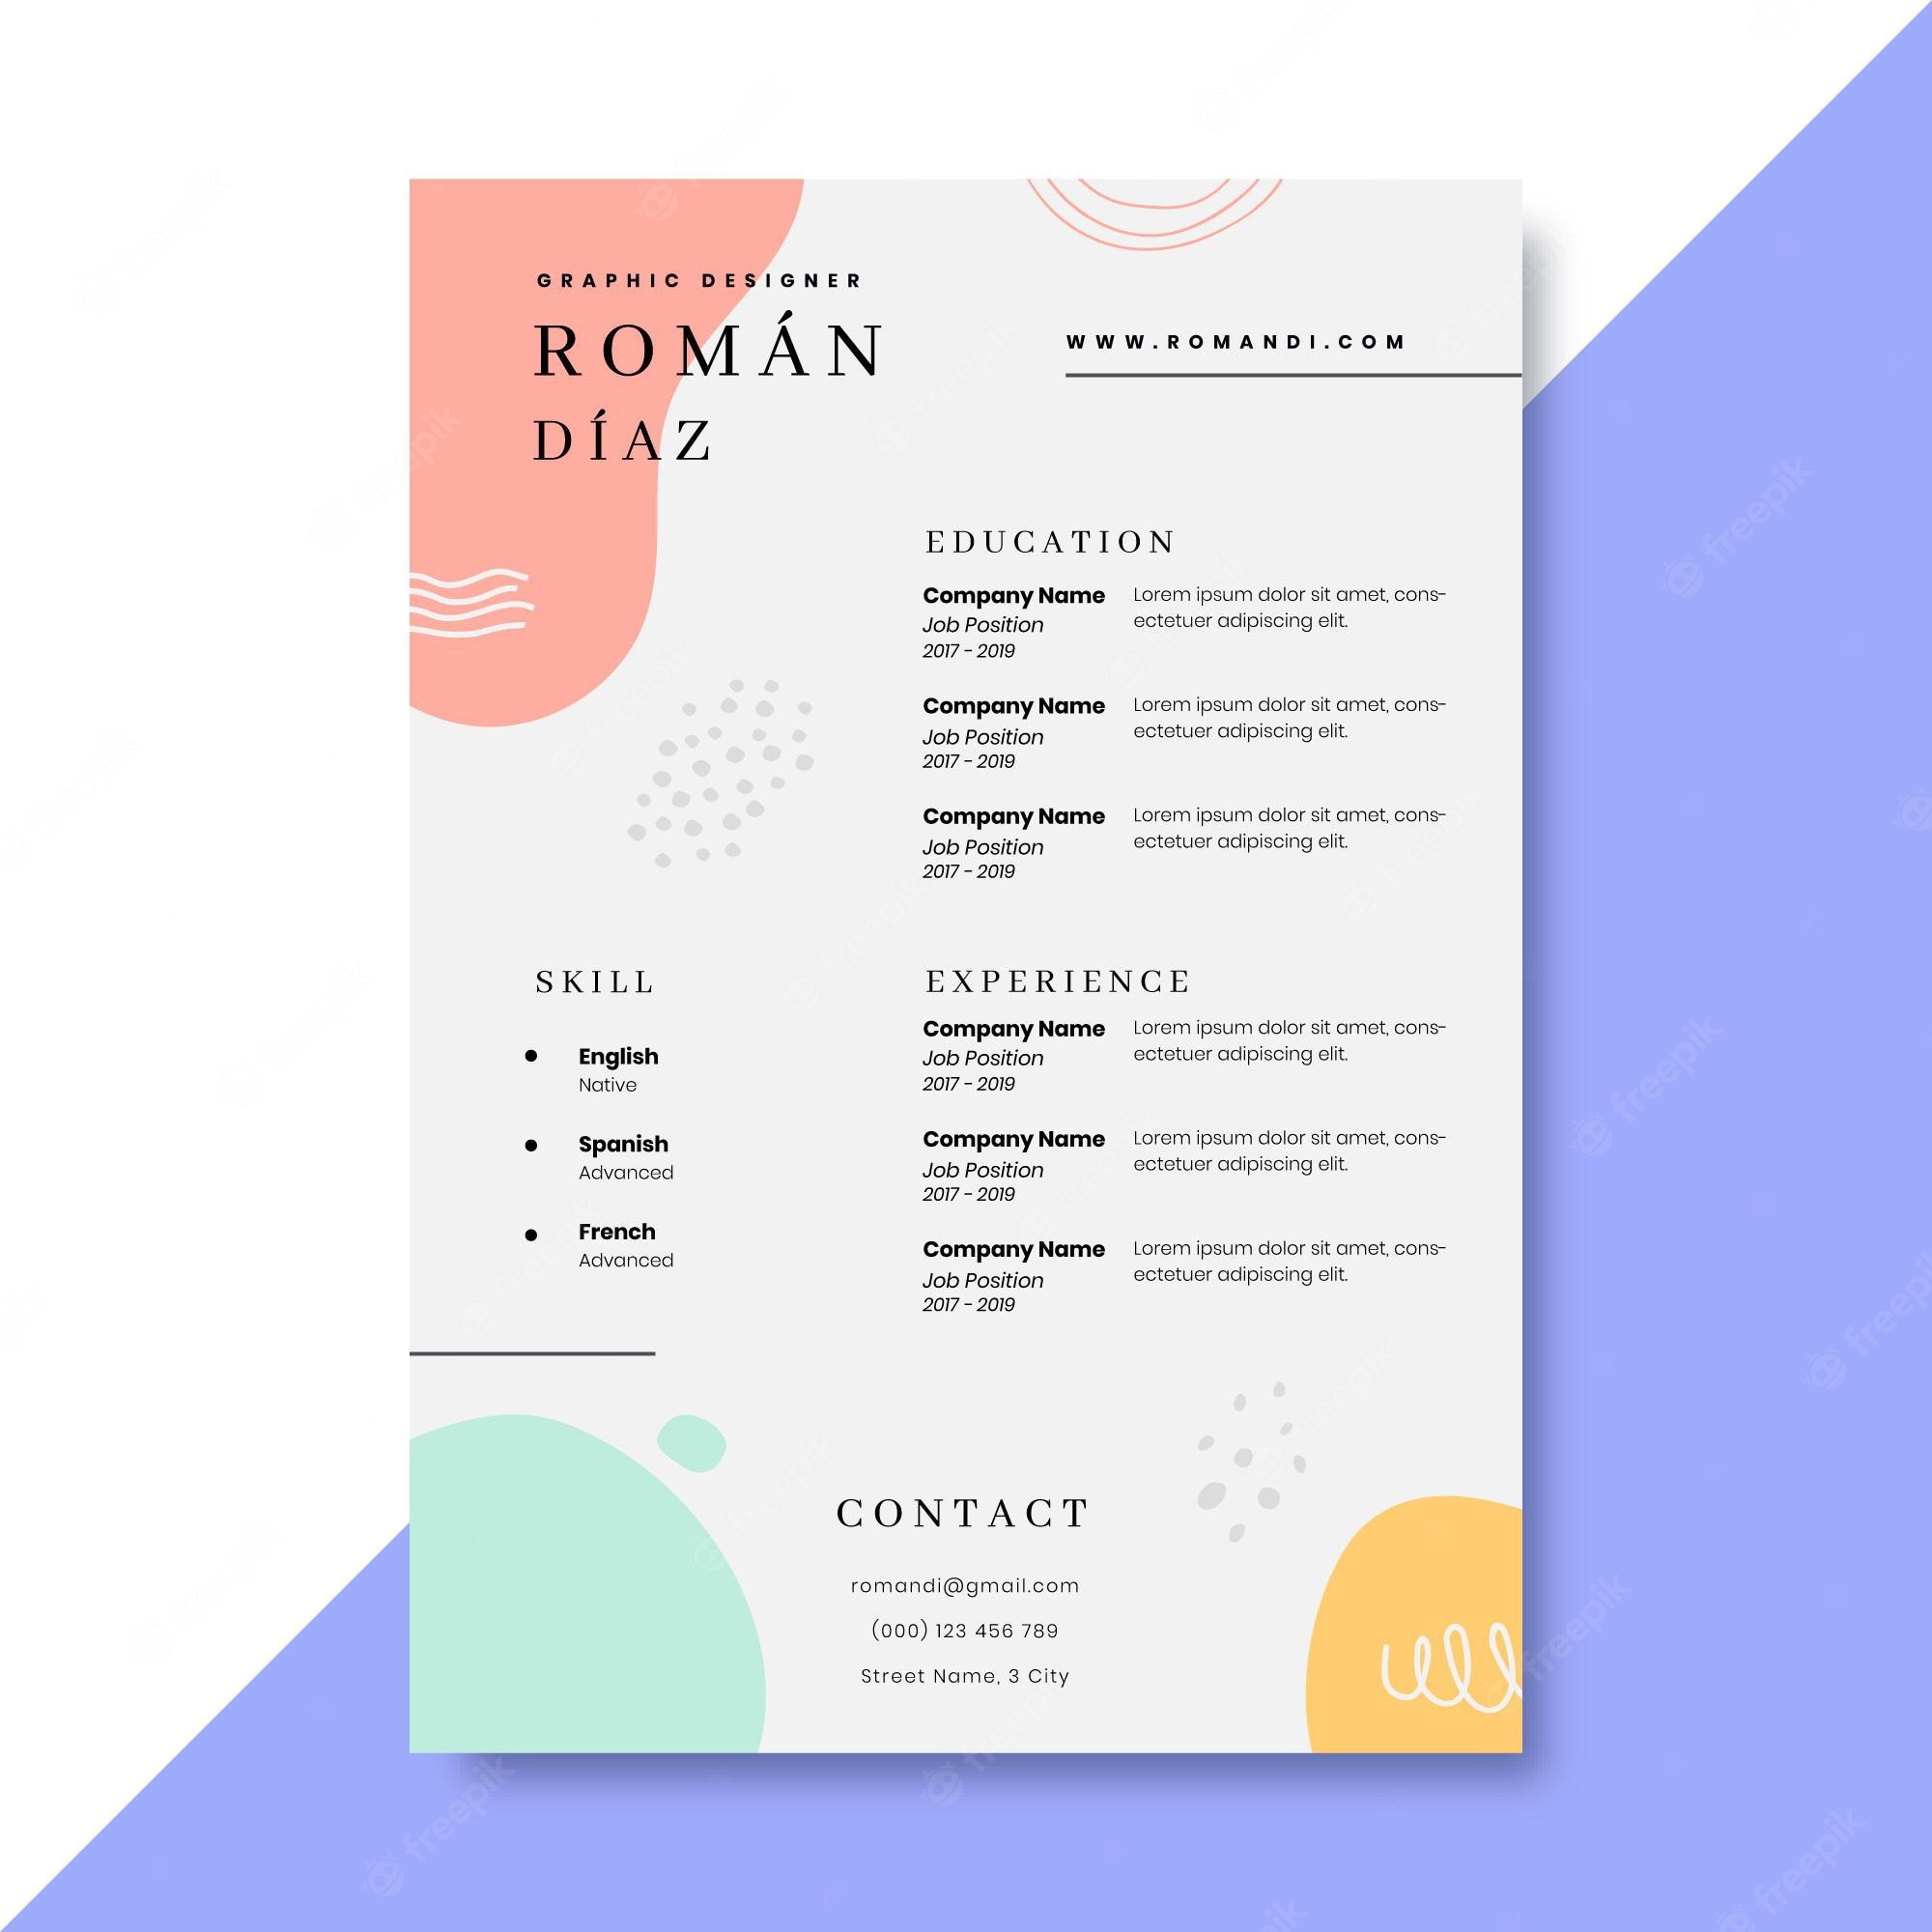 Free Sample Of Graphic Designer Resume Graphic Design Resume Template Images Free Vectors, Stock Photos …